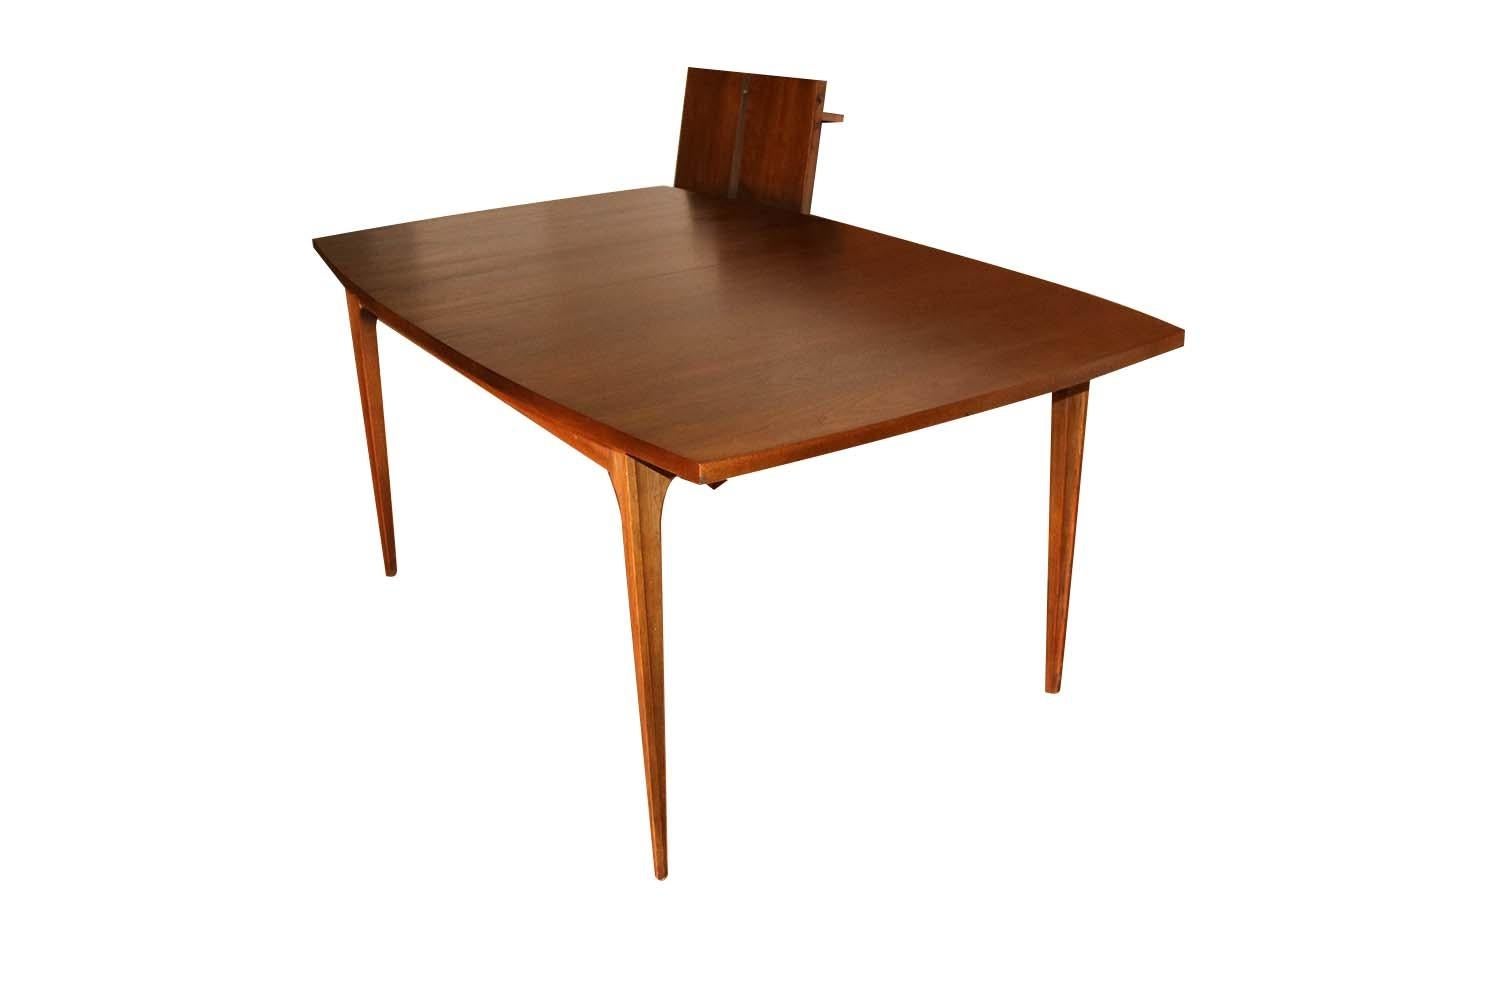 Stunning vintage Mid-Century Modern Broyhill Brasilia walnut dining table, circa early 1960s. This absolute jewel remains in nearly pristine condition throughout. The Brasilia line is a collection that was first presented at the world’s fair in